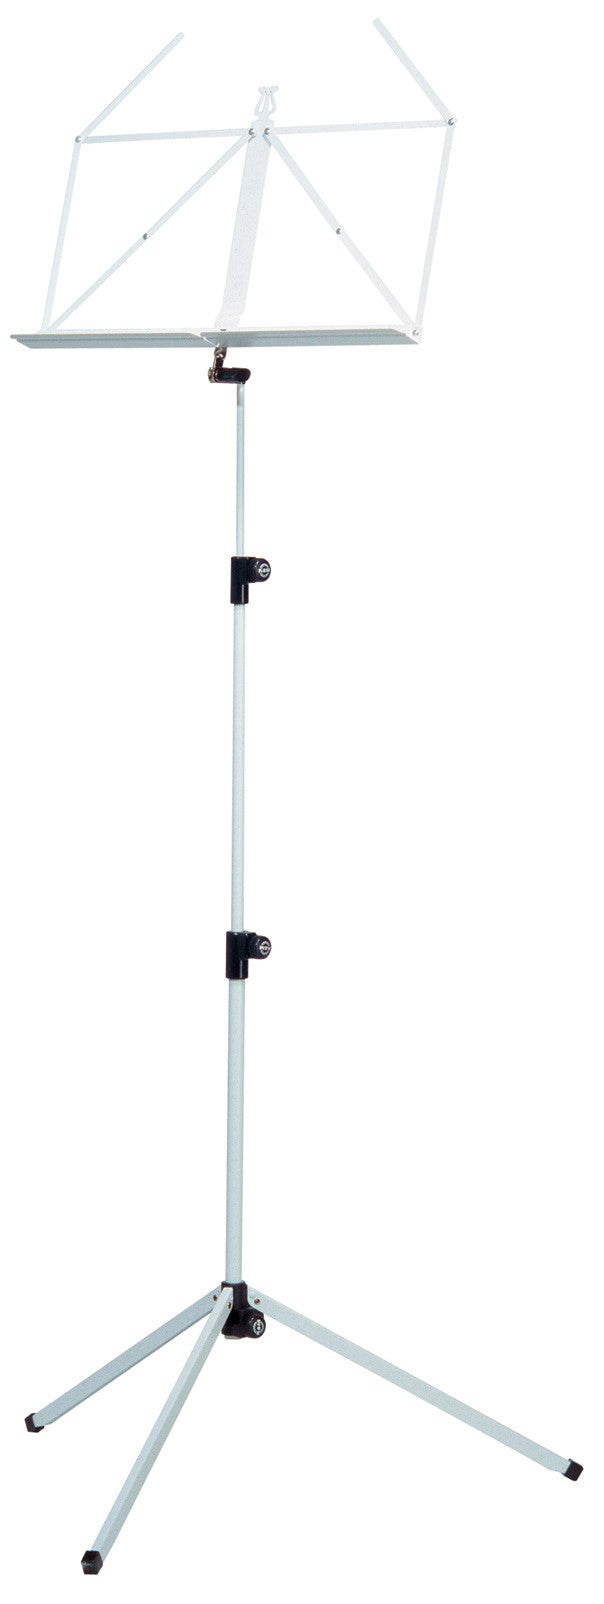 The K&M 100/1 Classic Music Stand - White